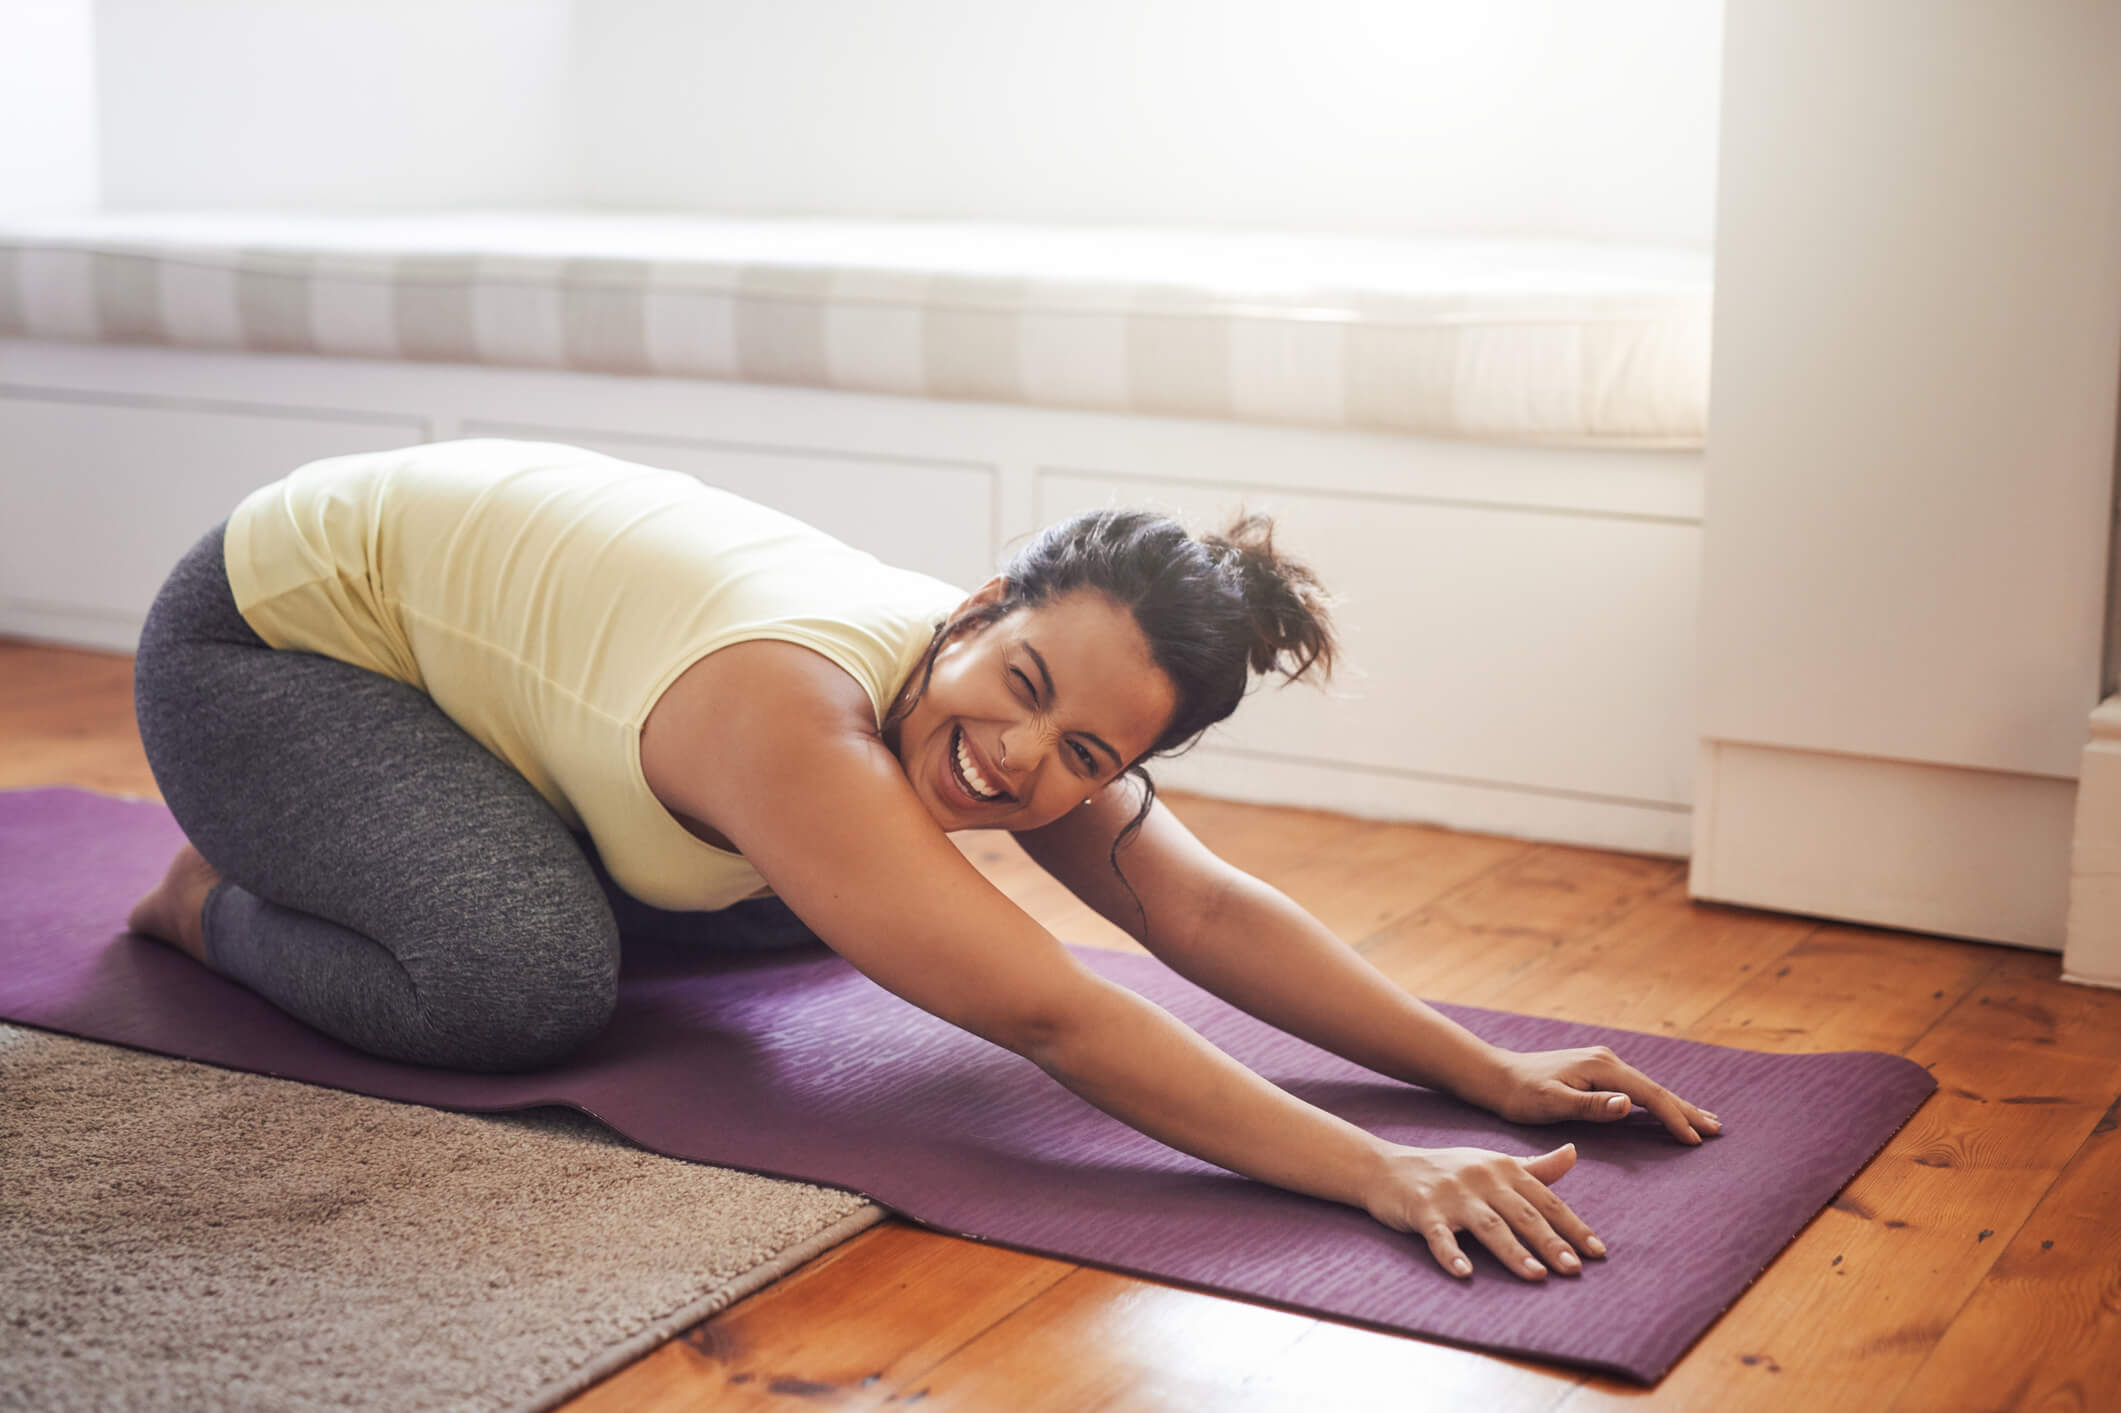 A young woman in workout gear stretches out on a purple yoga mat.